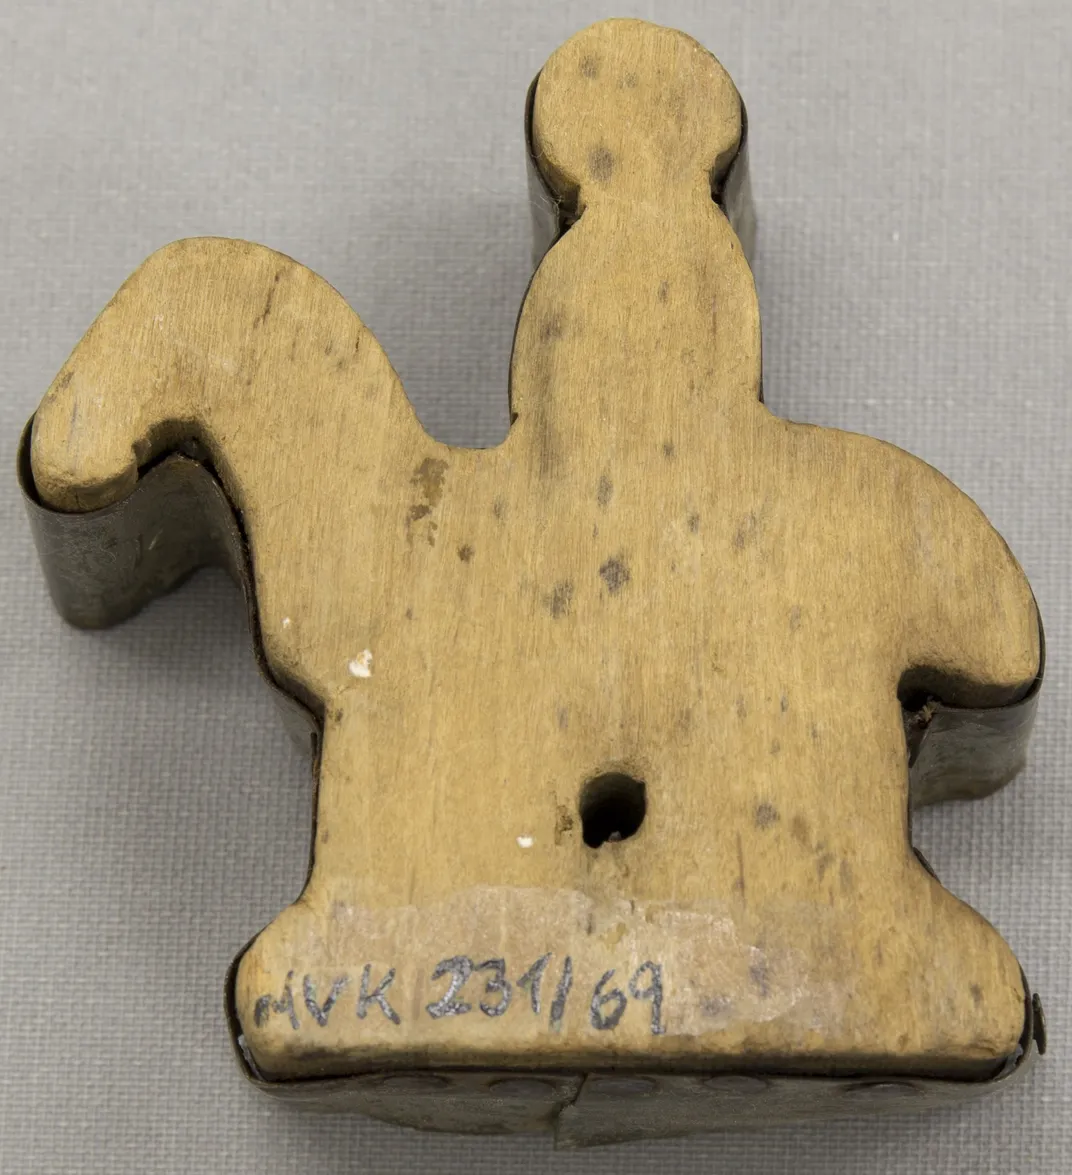 A vintage cookie cutter depicting a person on horseback